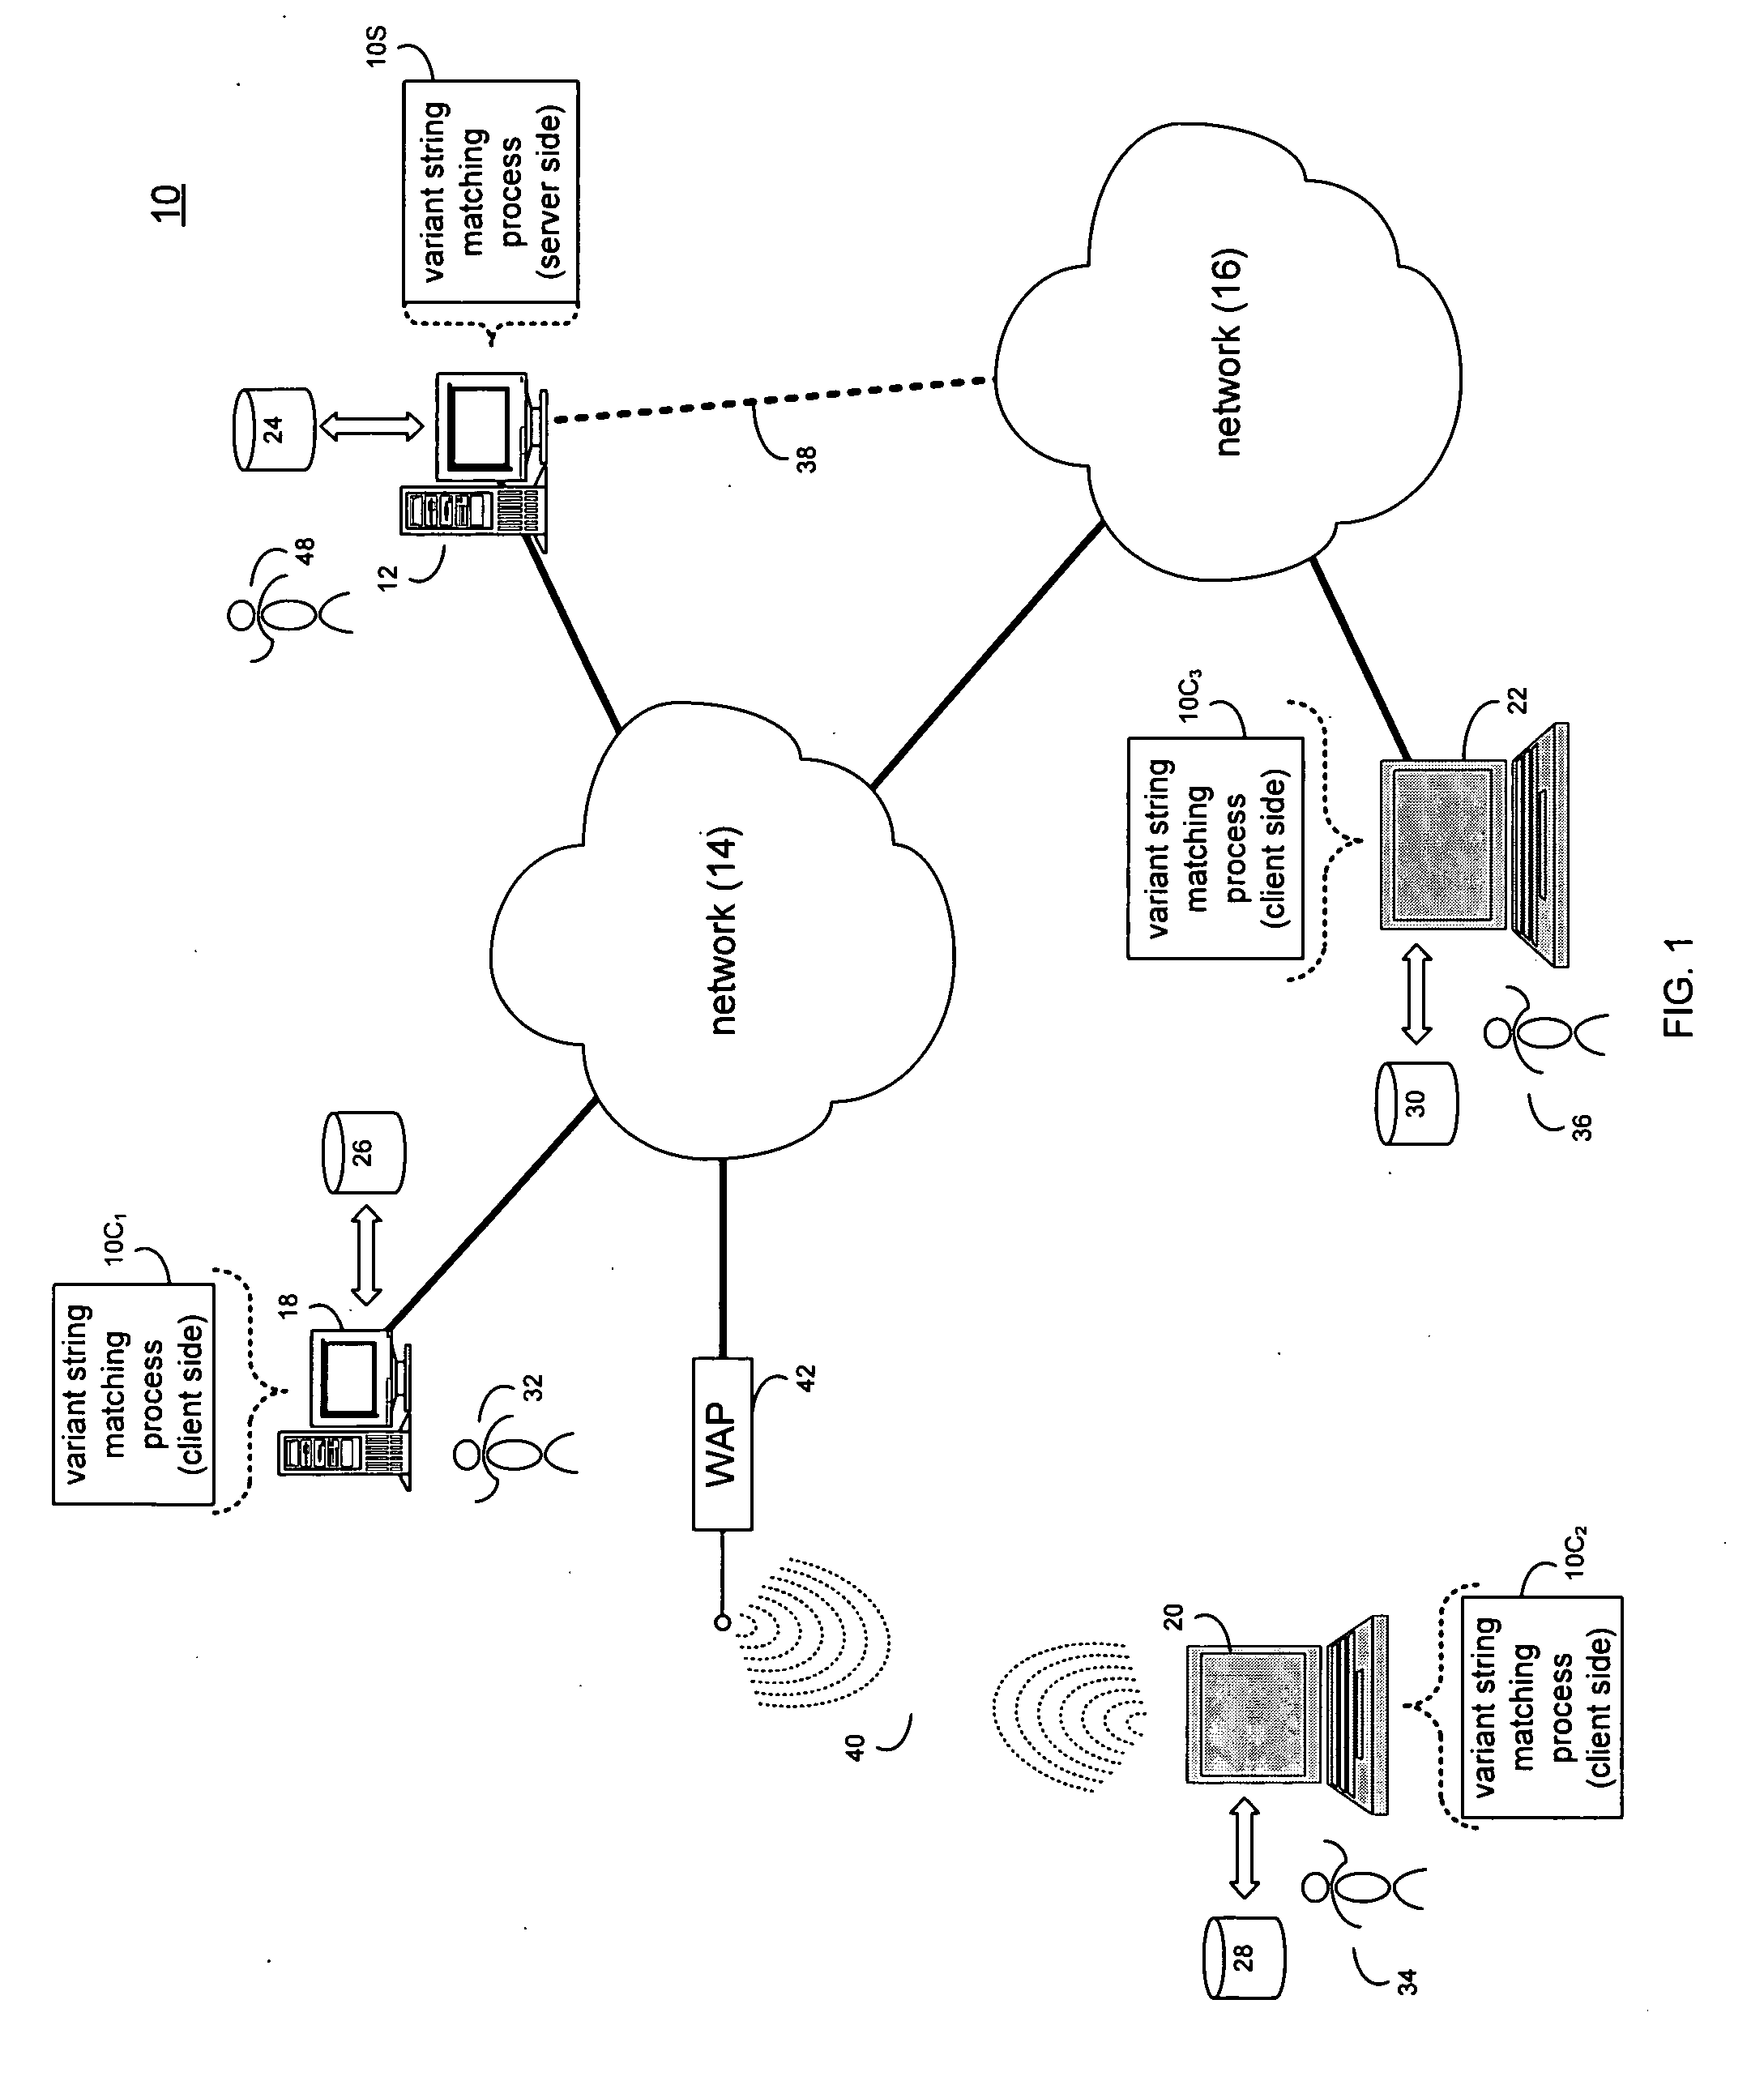 System and method for variant string matching